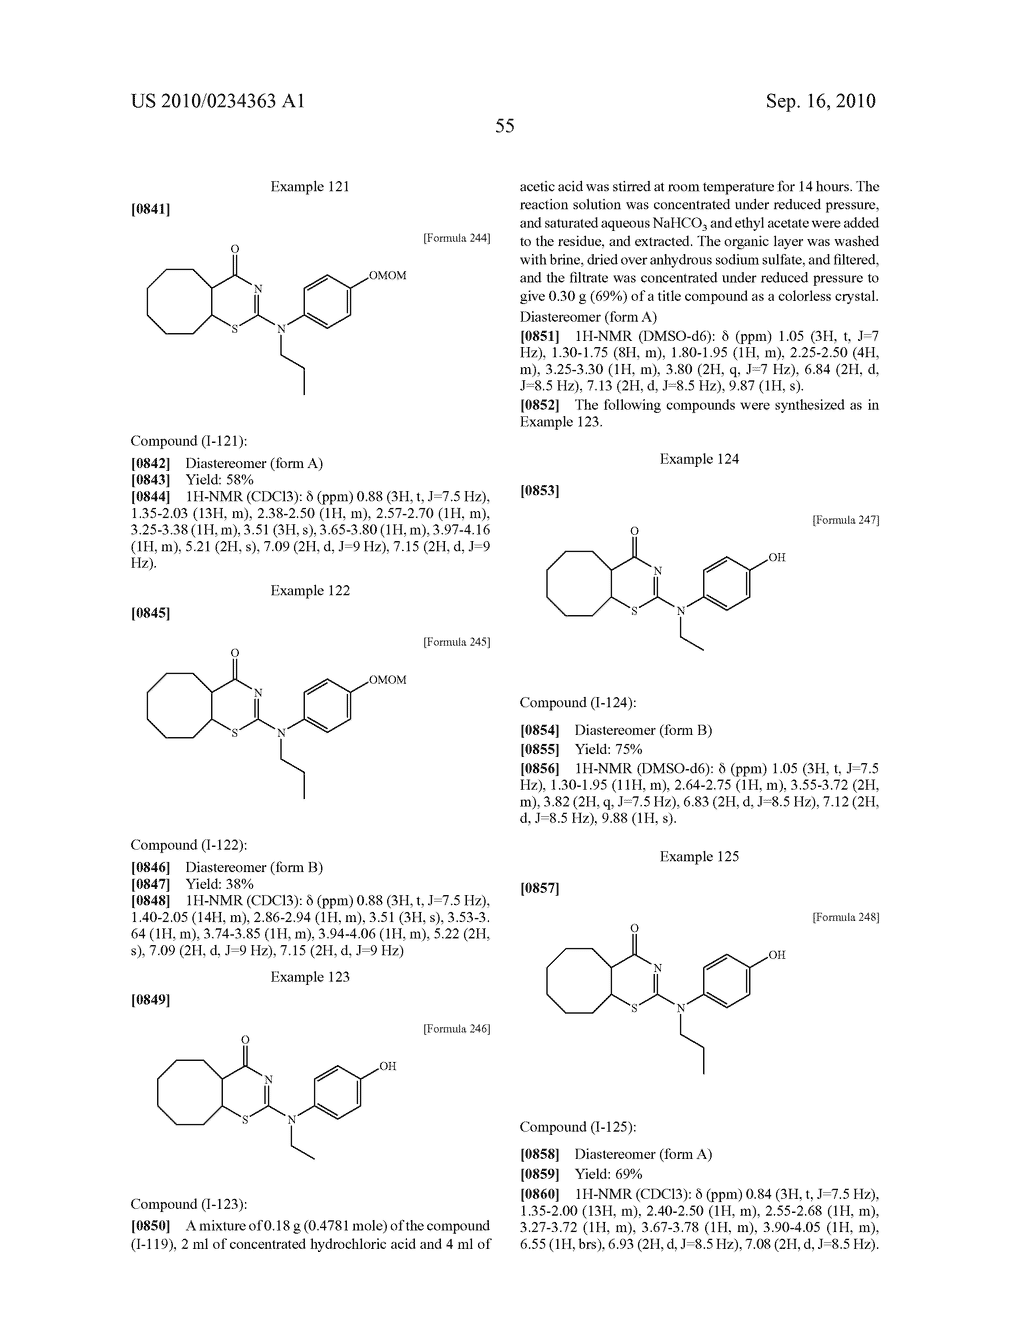 HETEROCYCLIC DERIVATIVE HAVING INHIBITORY ACTIVITY ON TYPE-I 11 DATA-HYDROXYSTEROID DEHYDROGENASE - diagram, schematic, and image 56